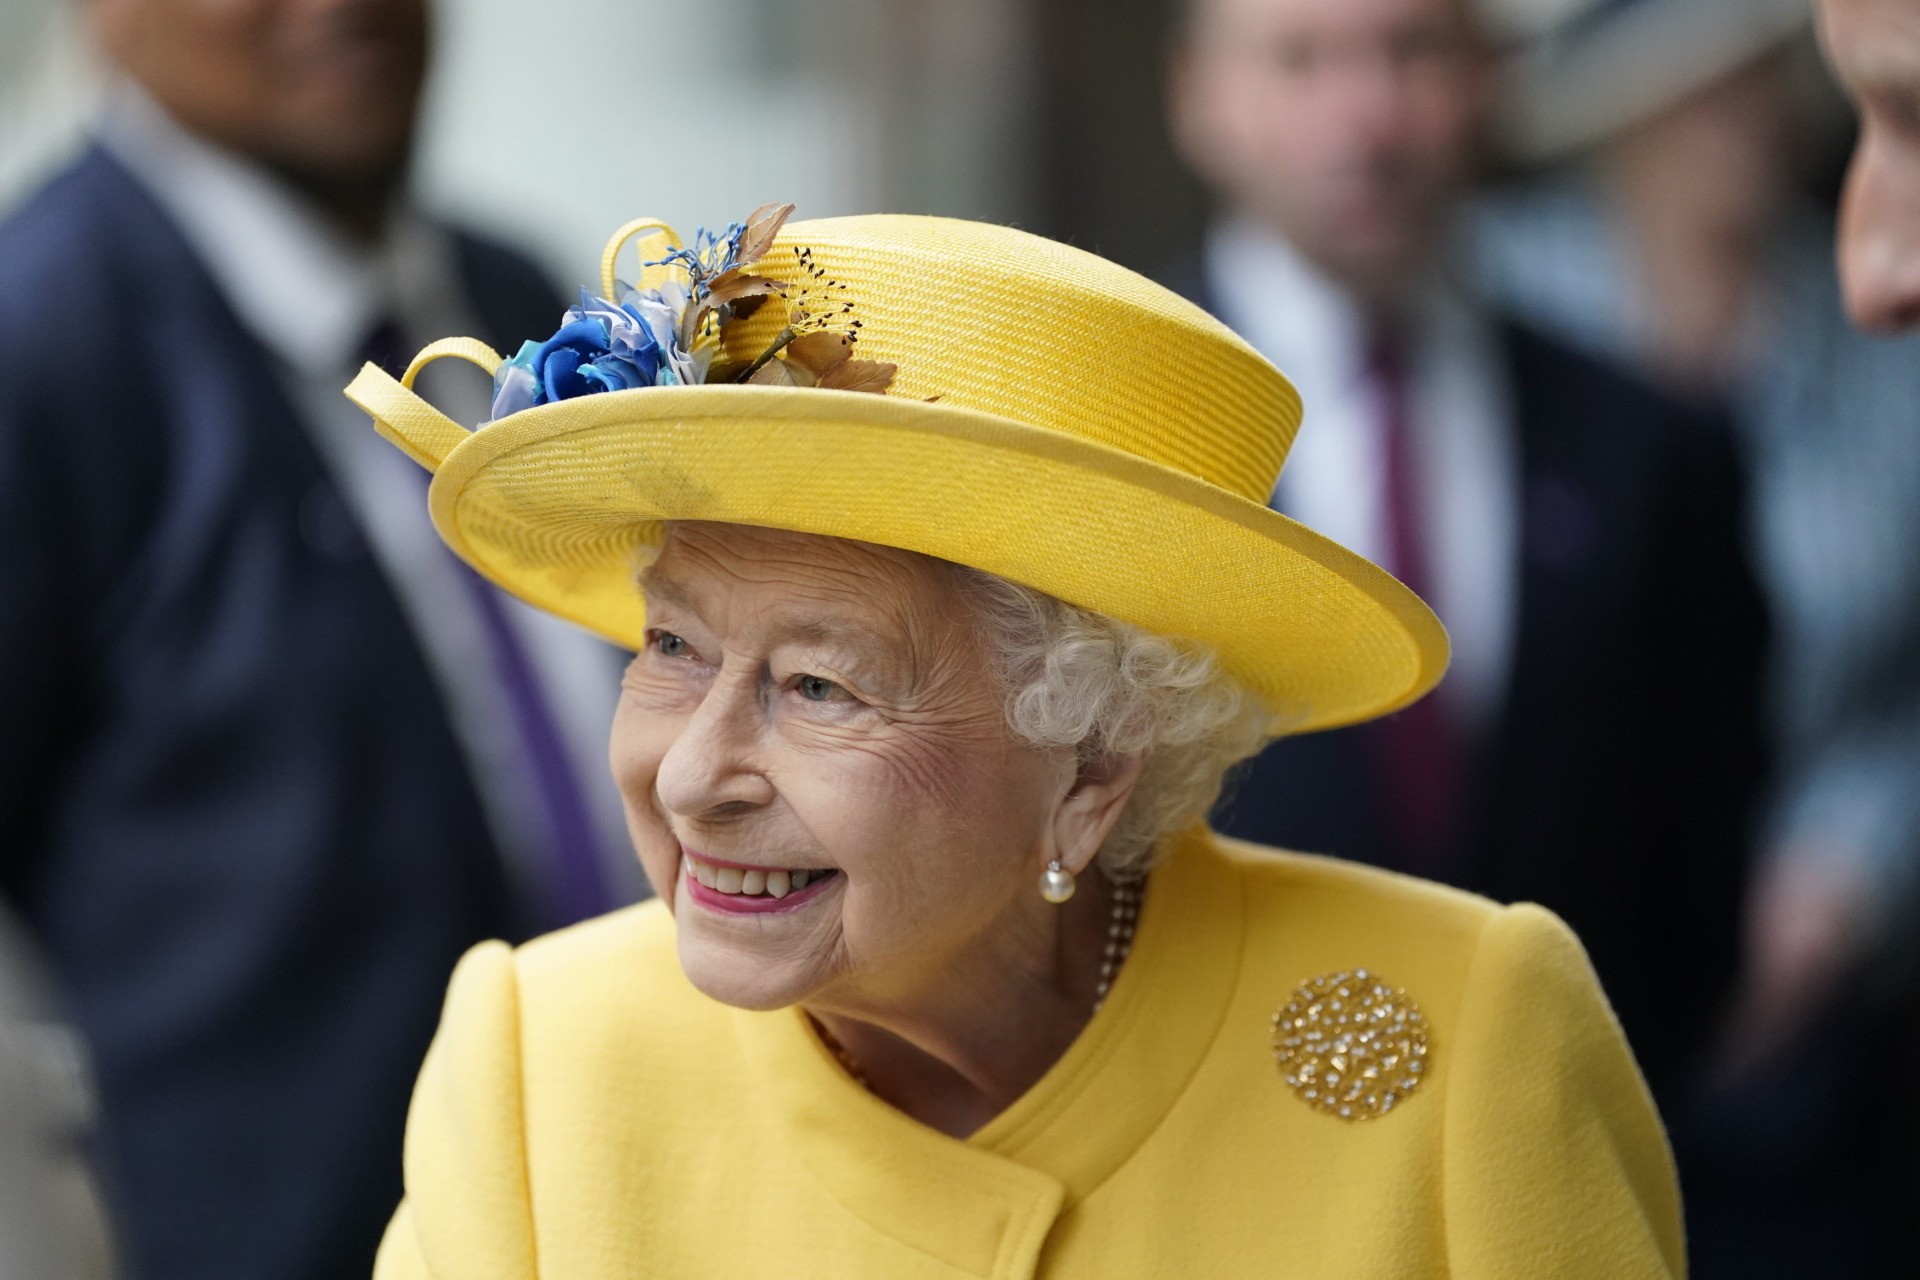 LONDON, ENGLAND - MAY 17: Queen Elizabeth II arrives to mark the completion of London's Crossrail project at Paddington Station on May 17, 2022 in London, England. (Photo by Andrew Matthews - WPA Pool/Getty Images)